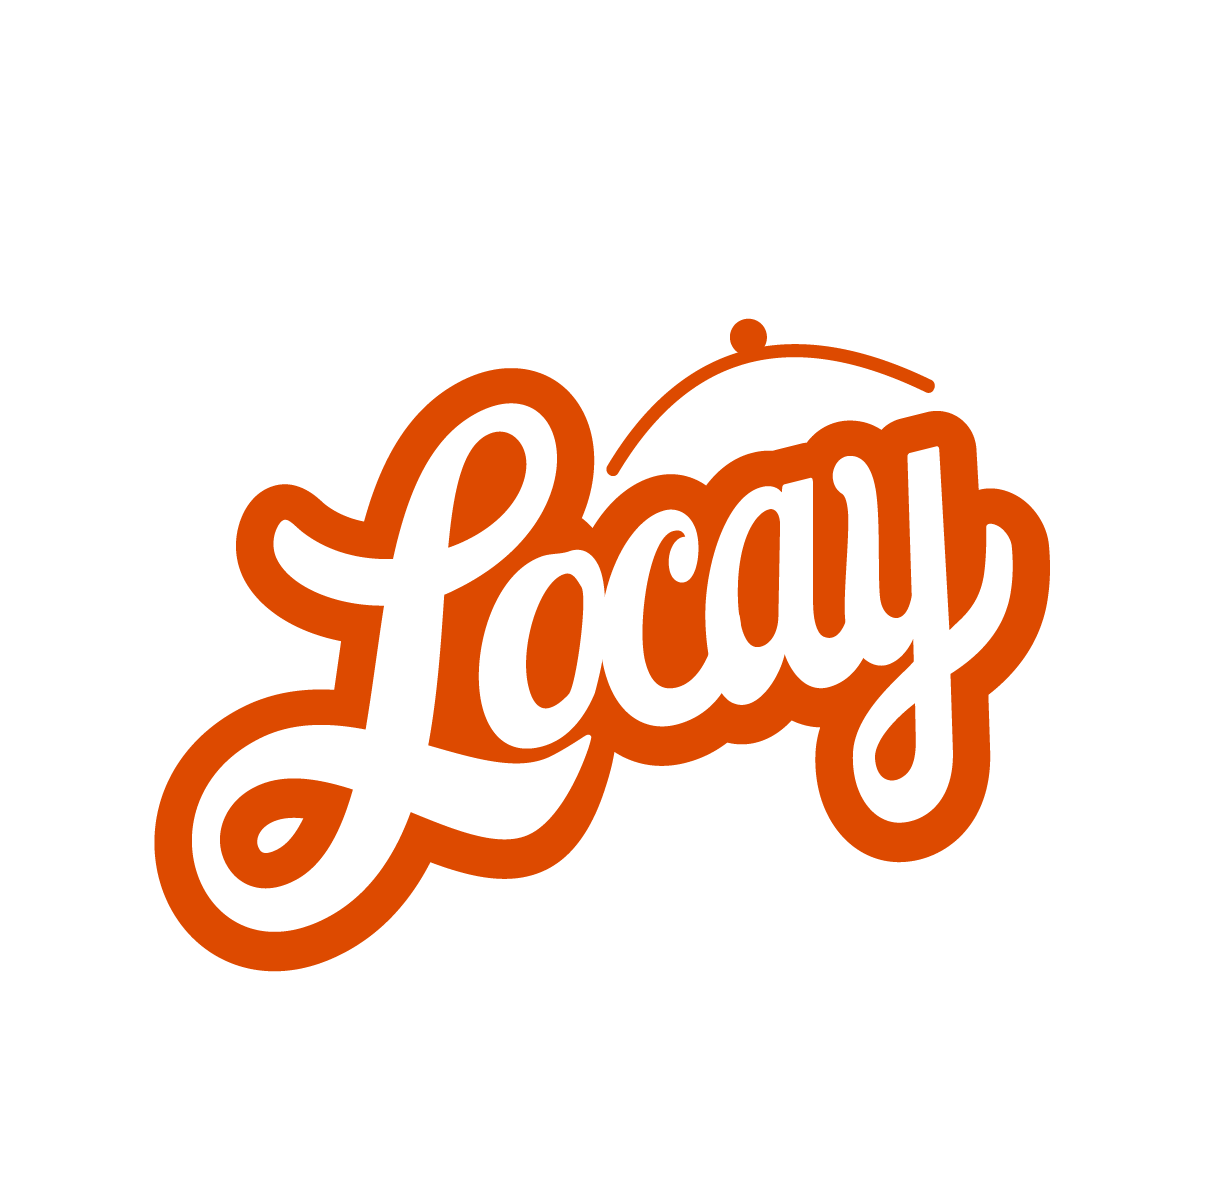 Locay, Inc. - The restaurant ordering system.